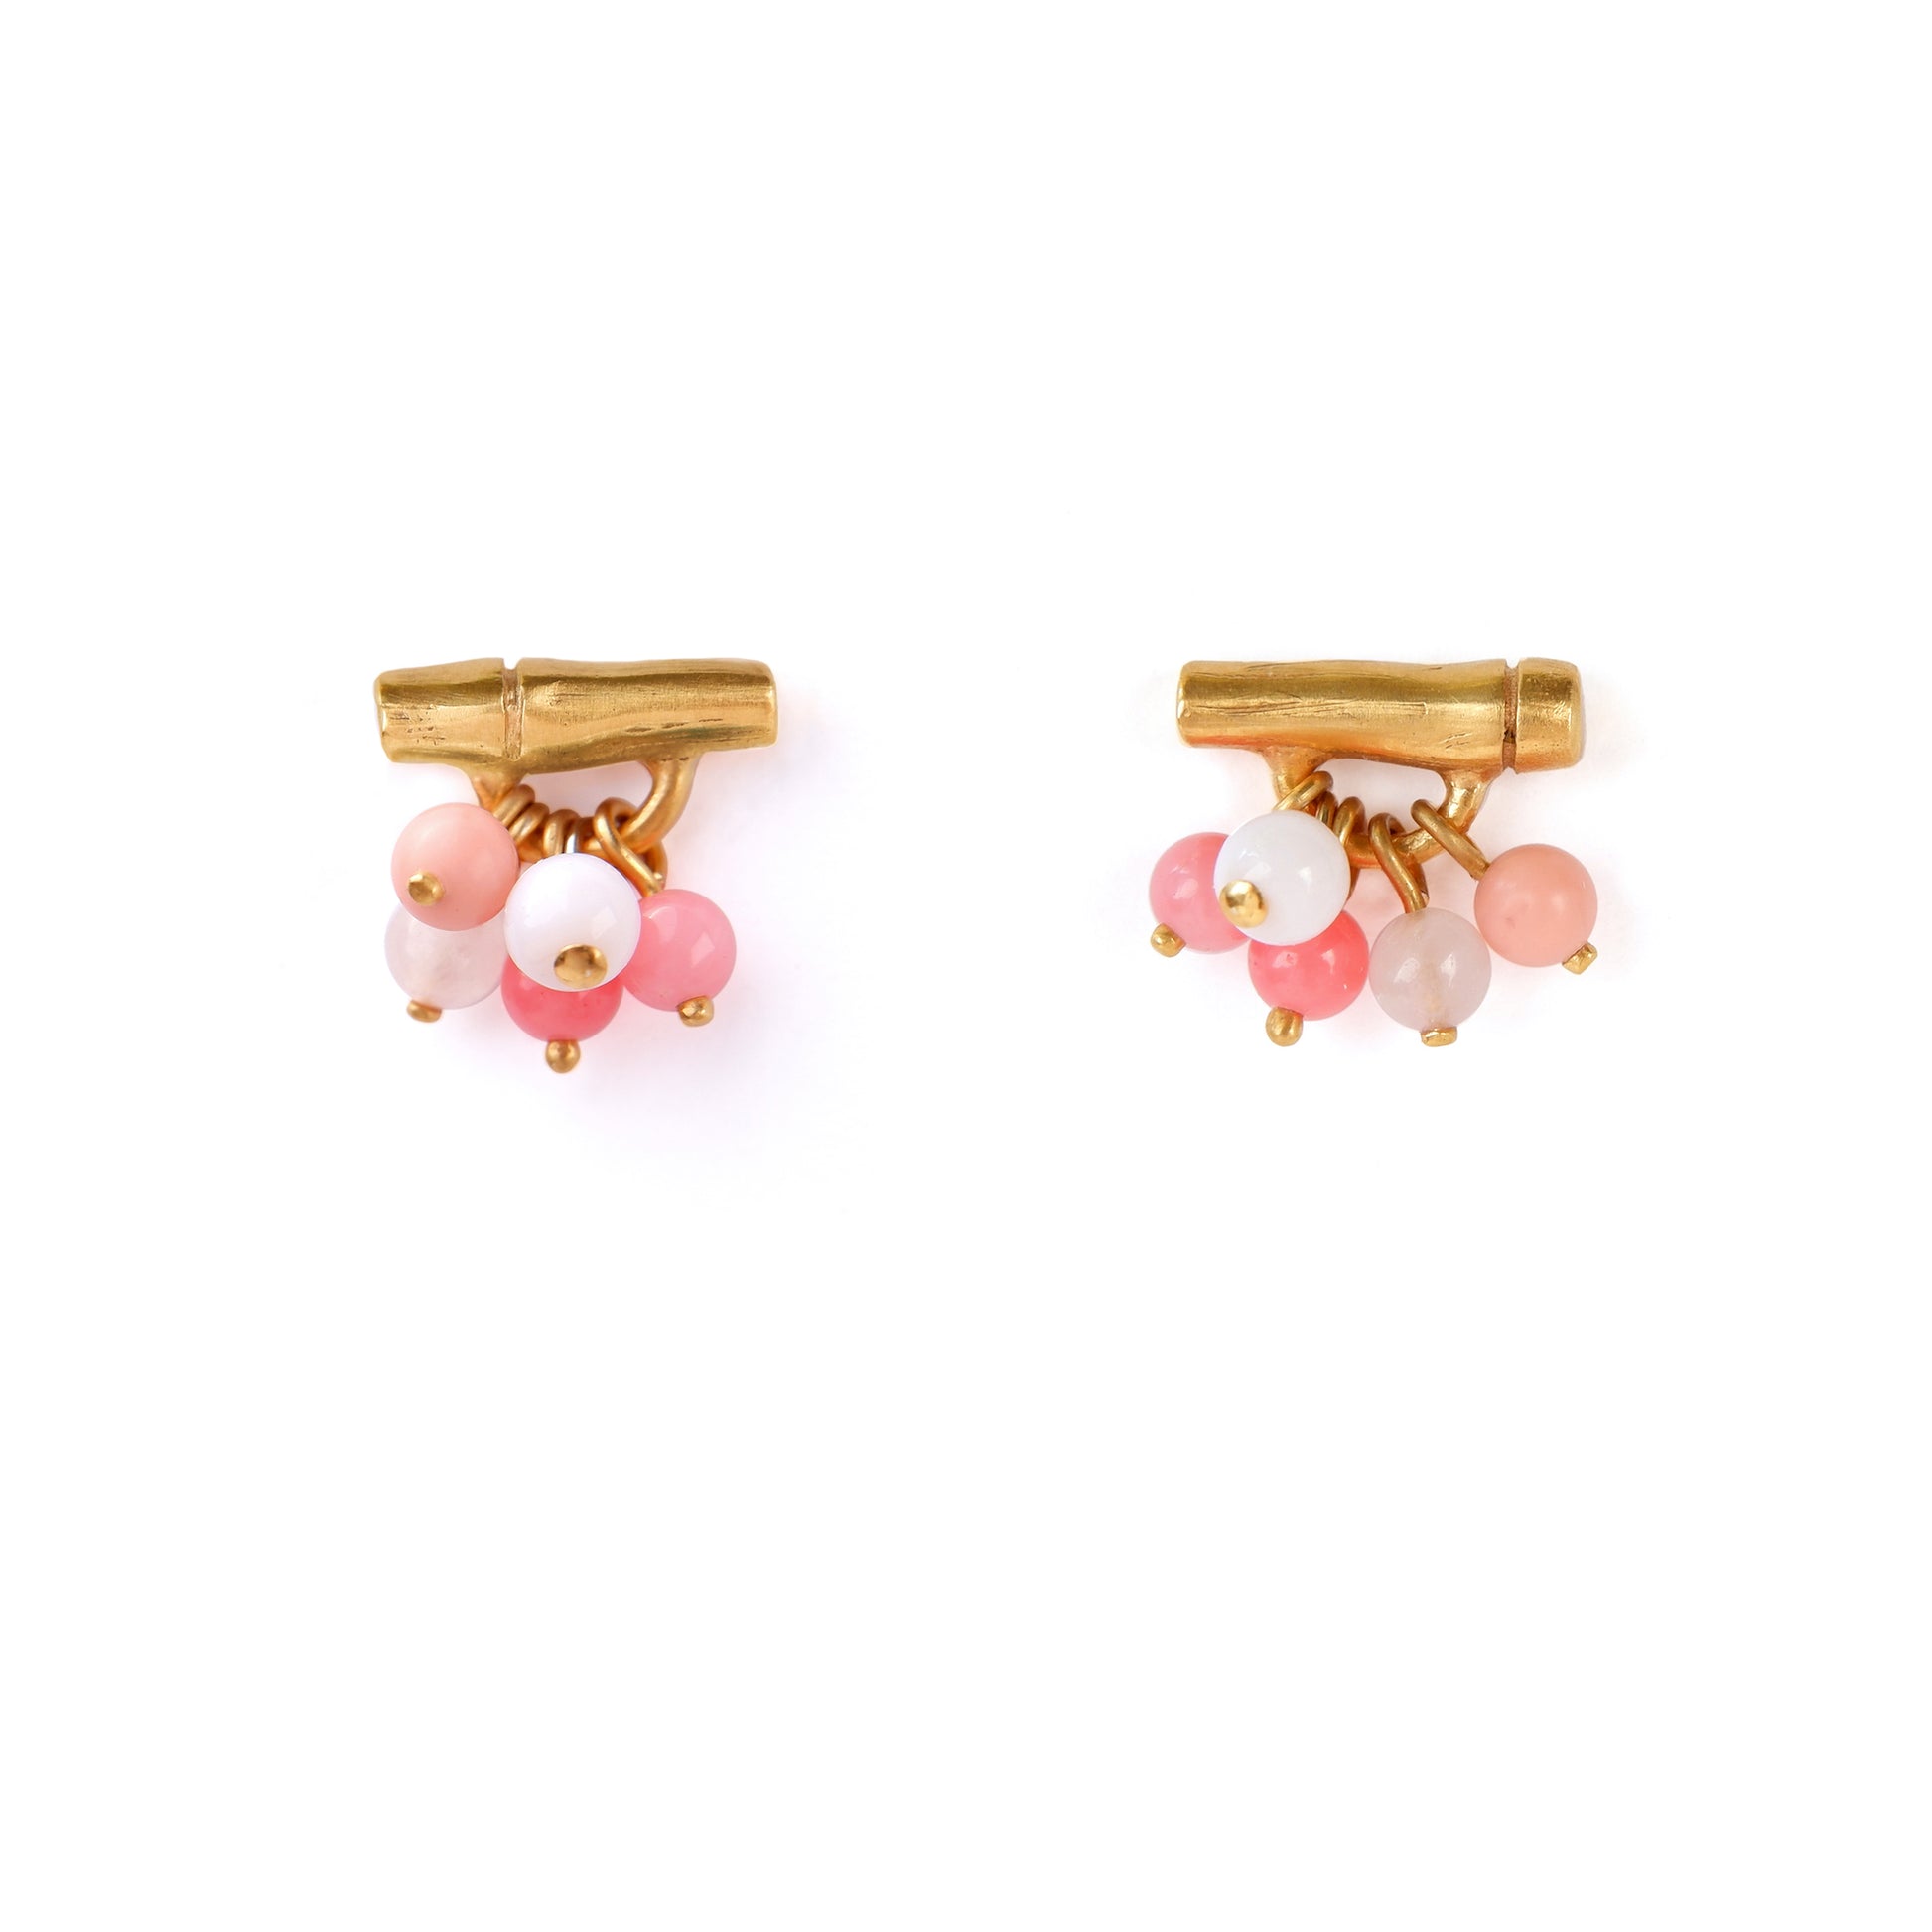 gold vermeil bamboo bar stud earrings with gemstone beads in coral pink, white background